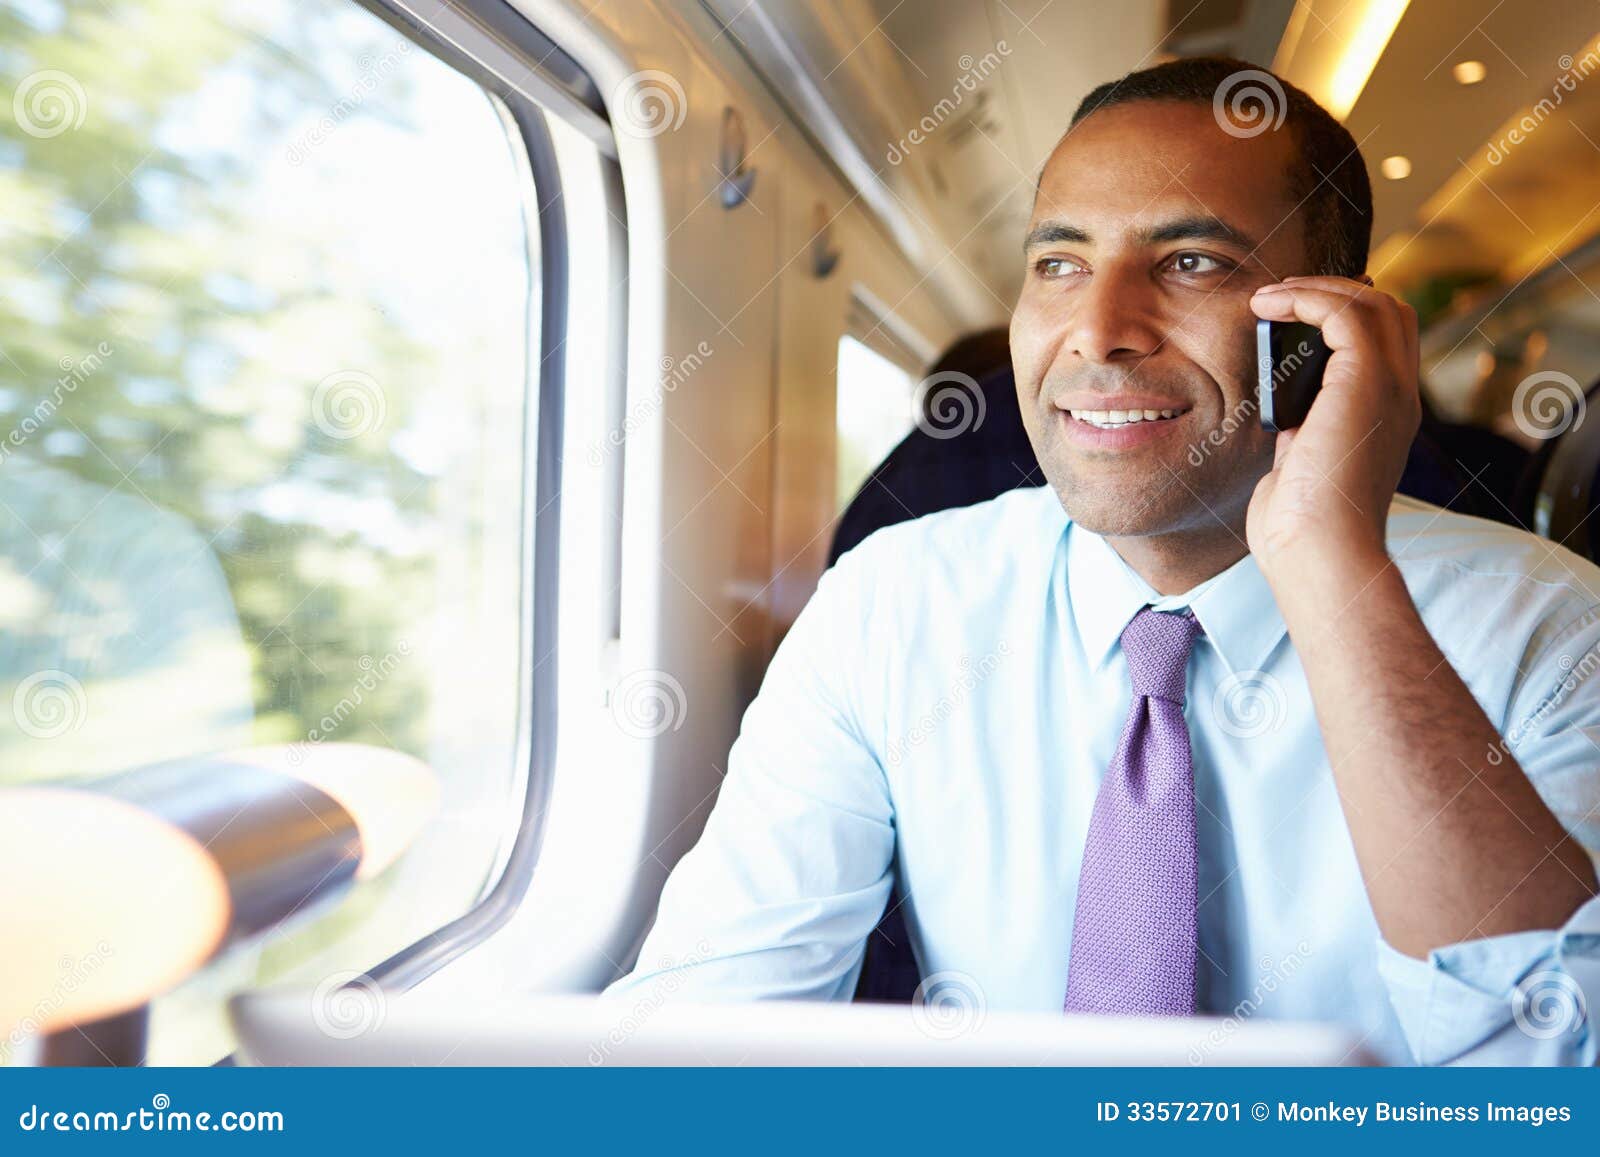 businessman commuting to work on train using mobile phone